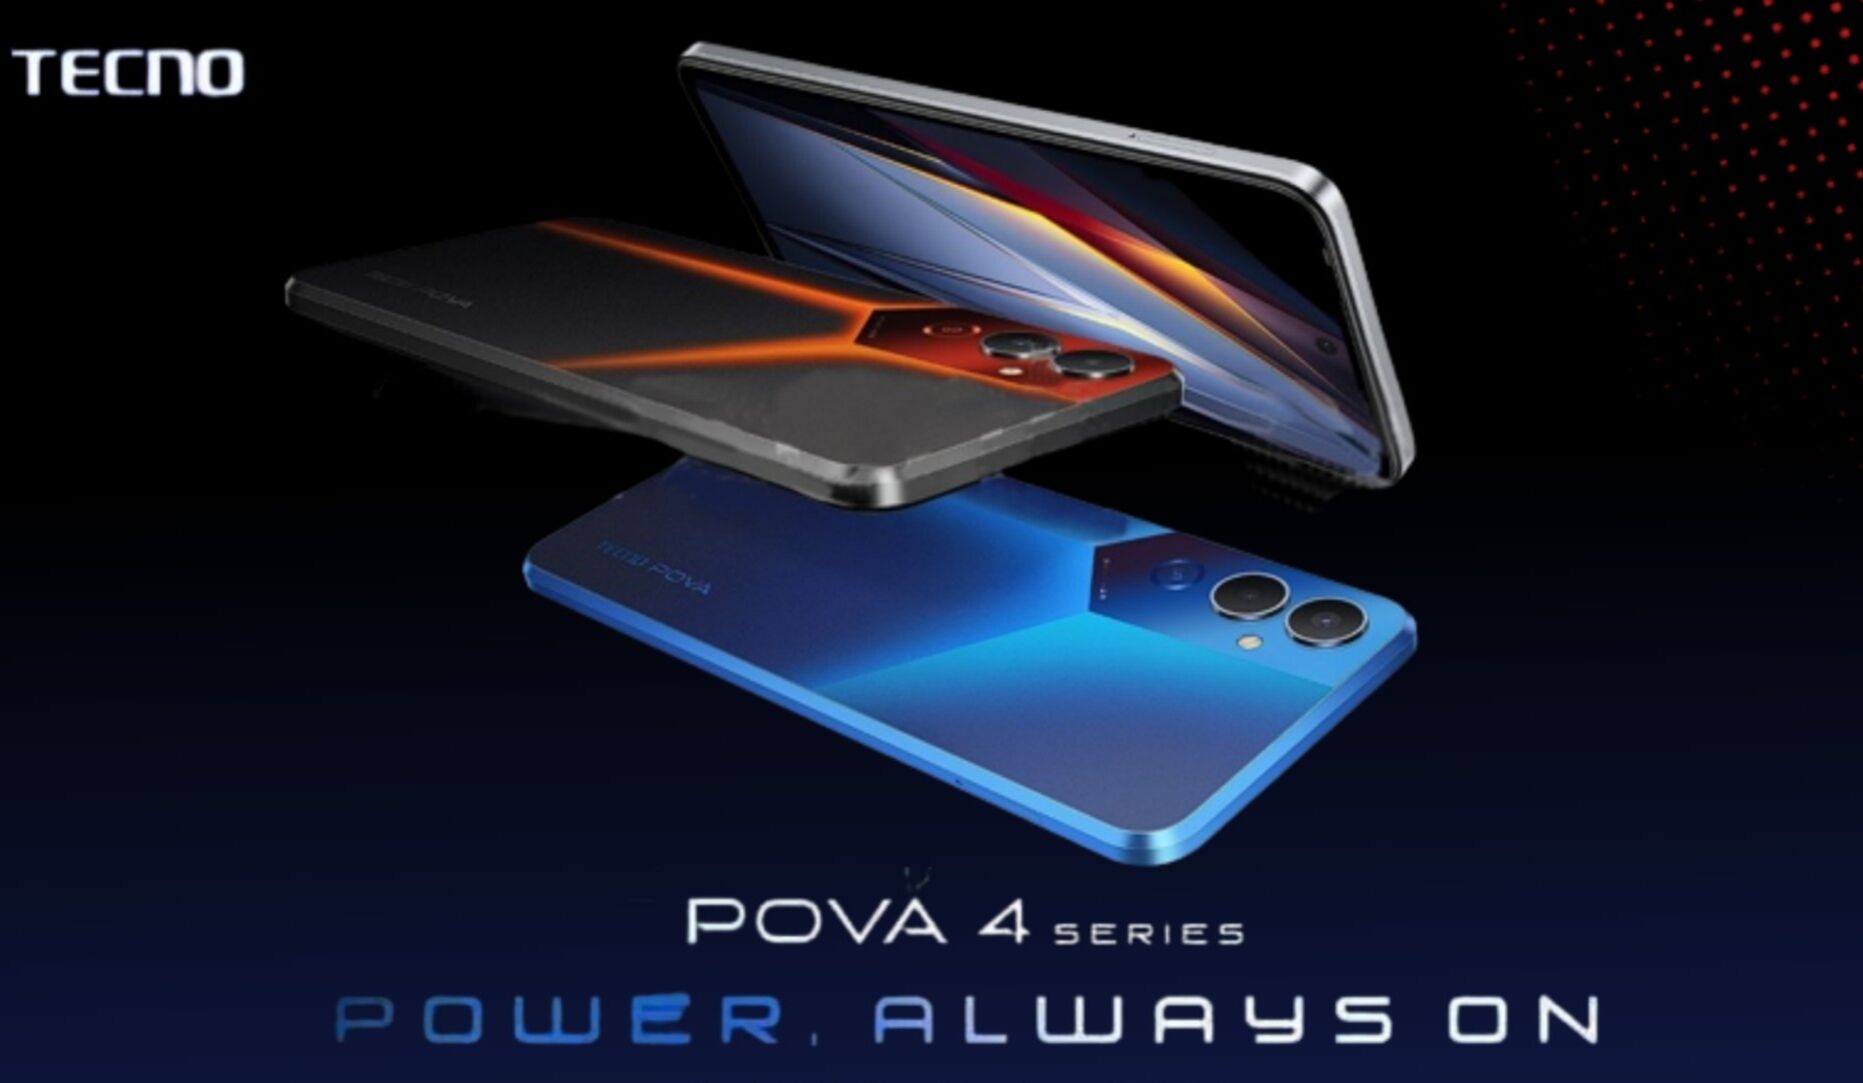 Specification of Tecno Pova 4 leaked before launch, many features including strong battery and 50MP camera will be available